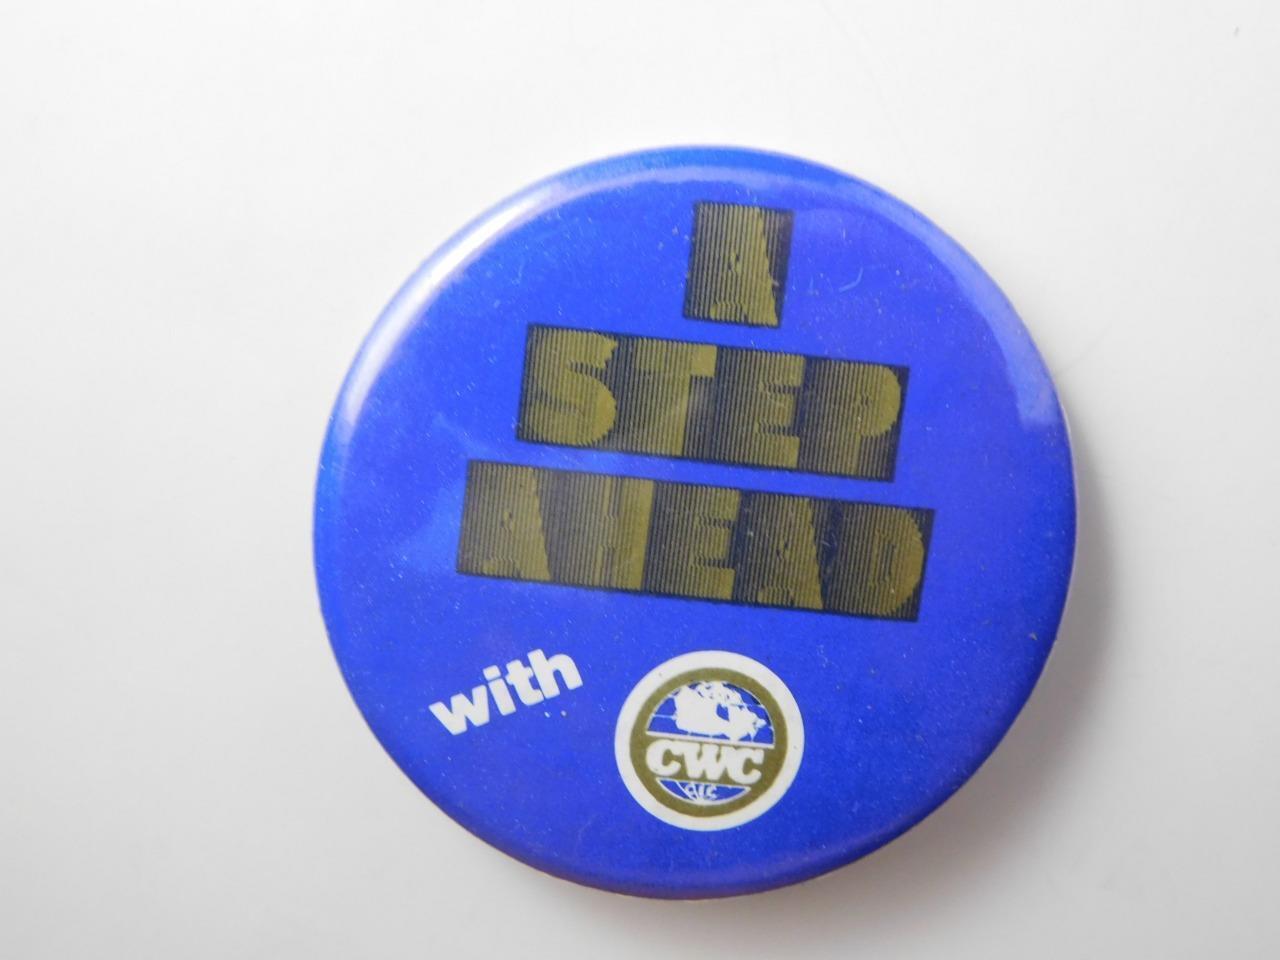 A STEP AHEAD CWC  OLC UNION VINTAGE BUTTON PIN  ADVERTISING